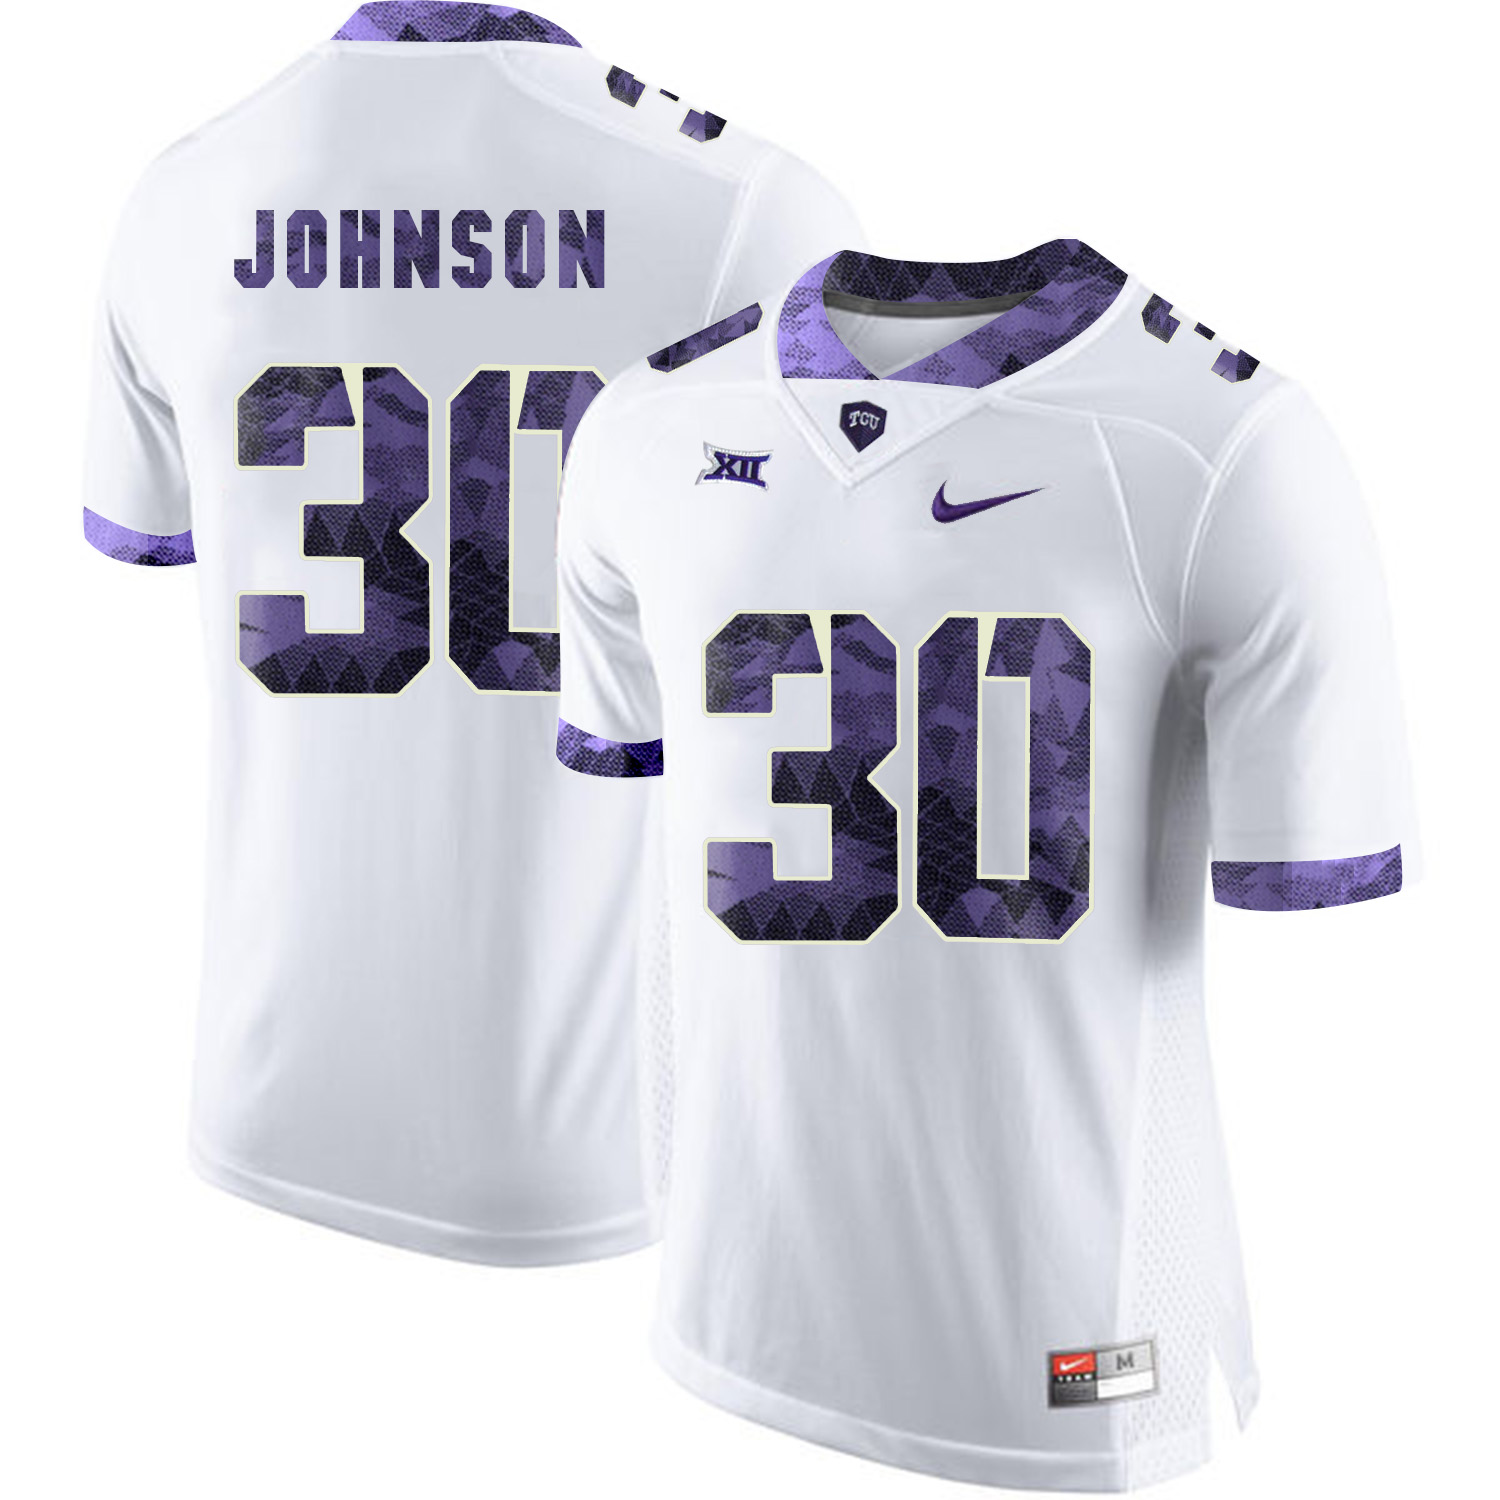 TCU Horned Frogs 30 Denzel Johnson White Print College Football Limited Jersey